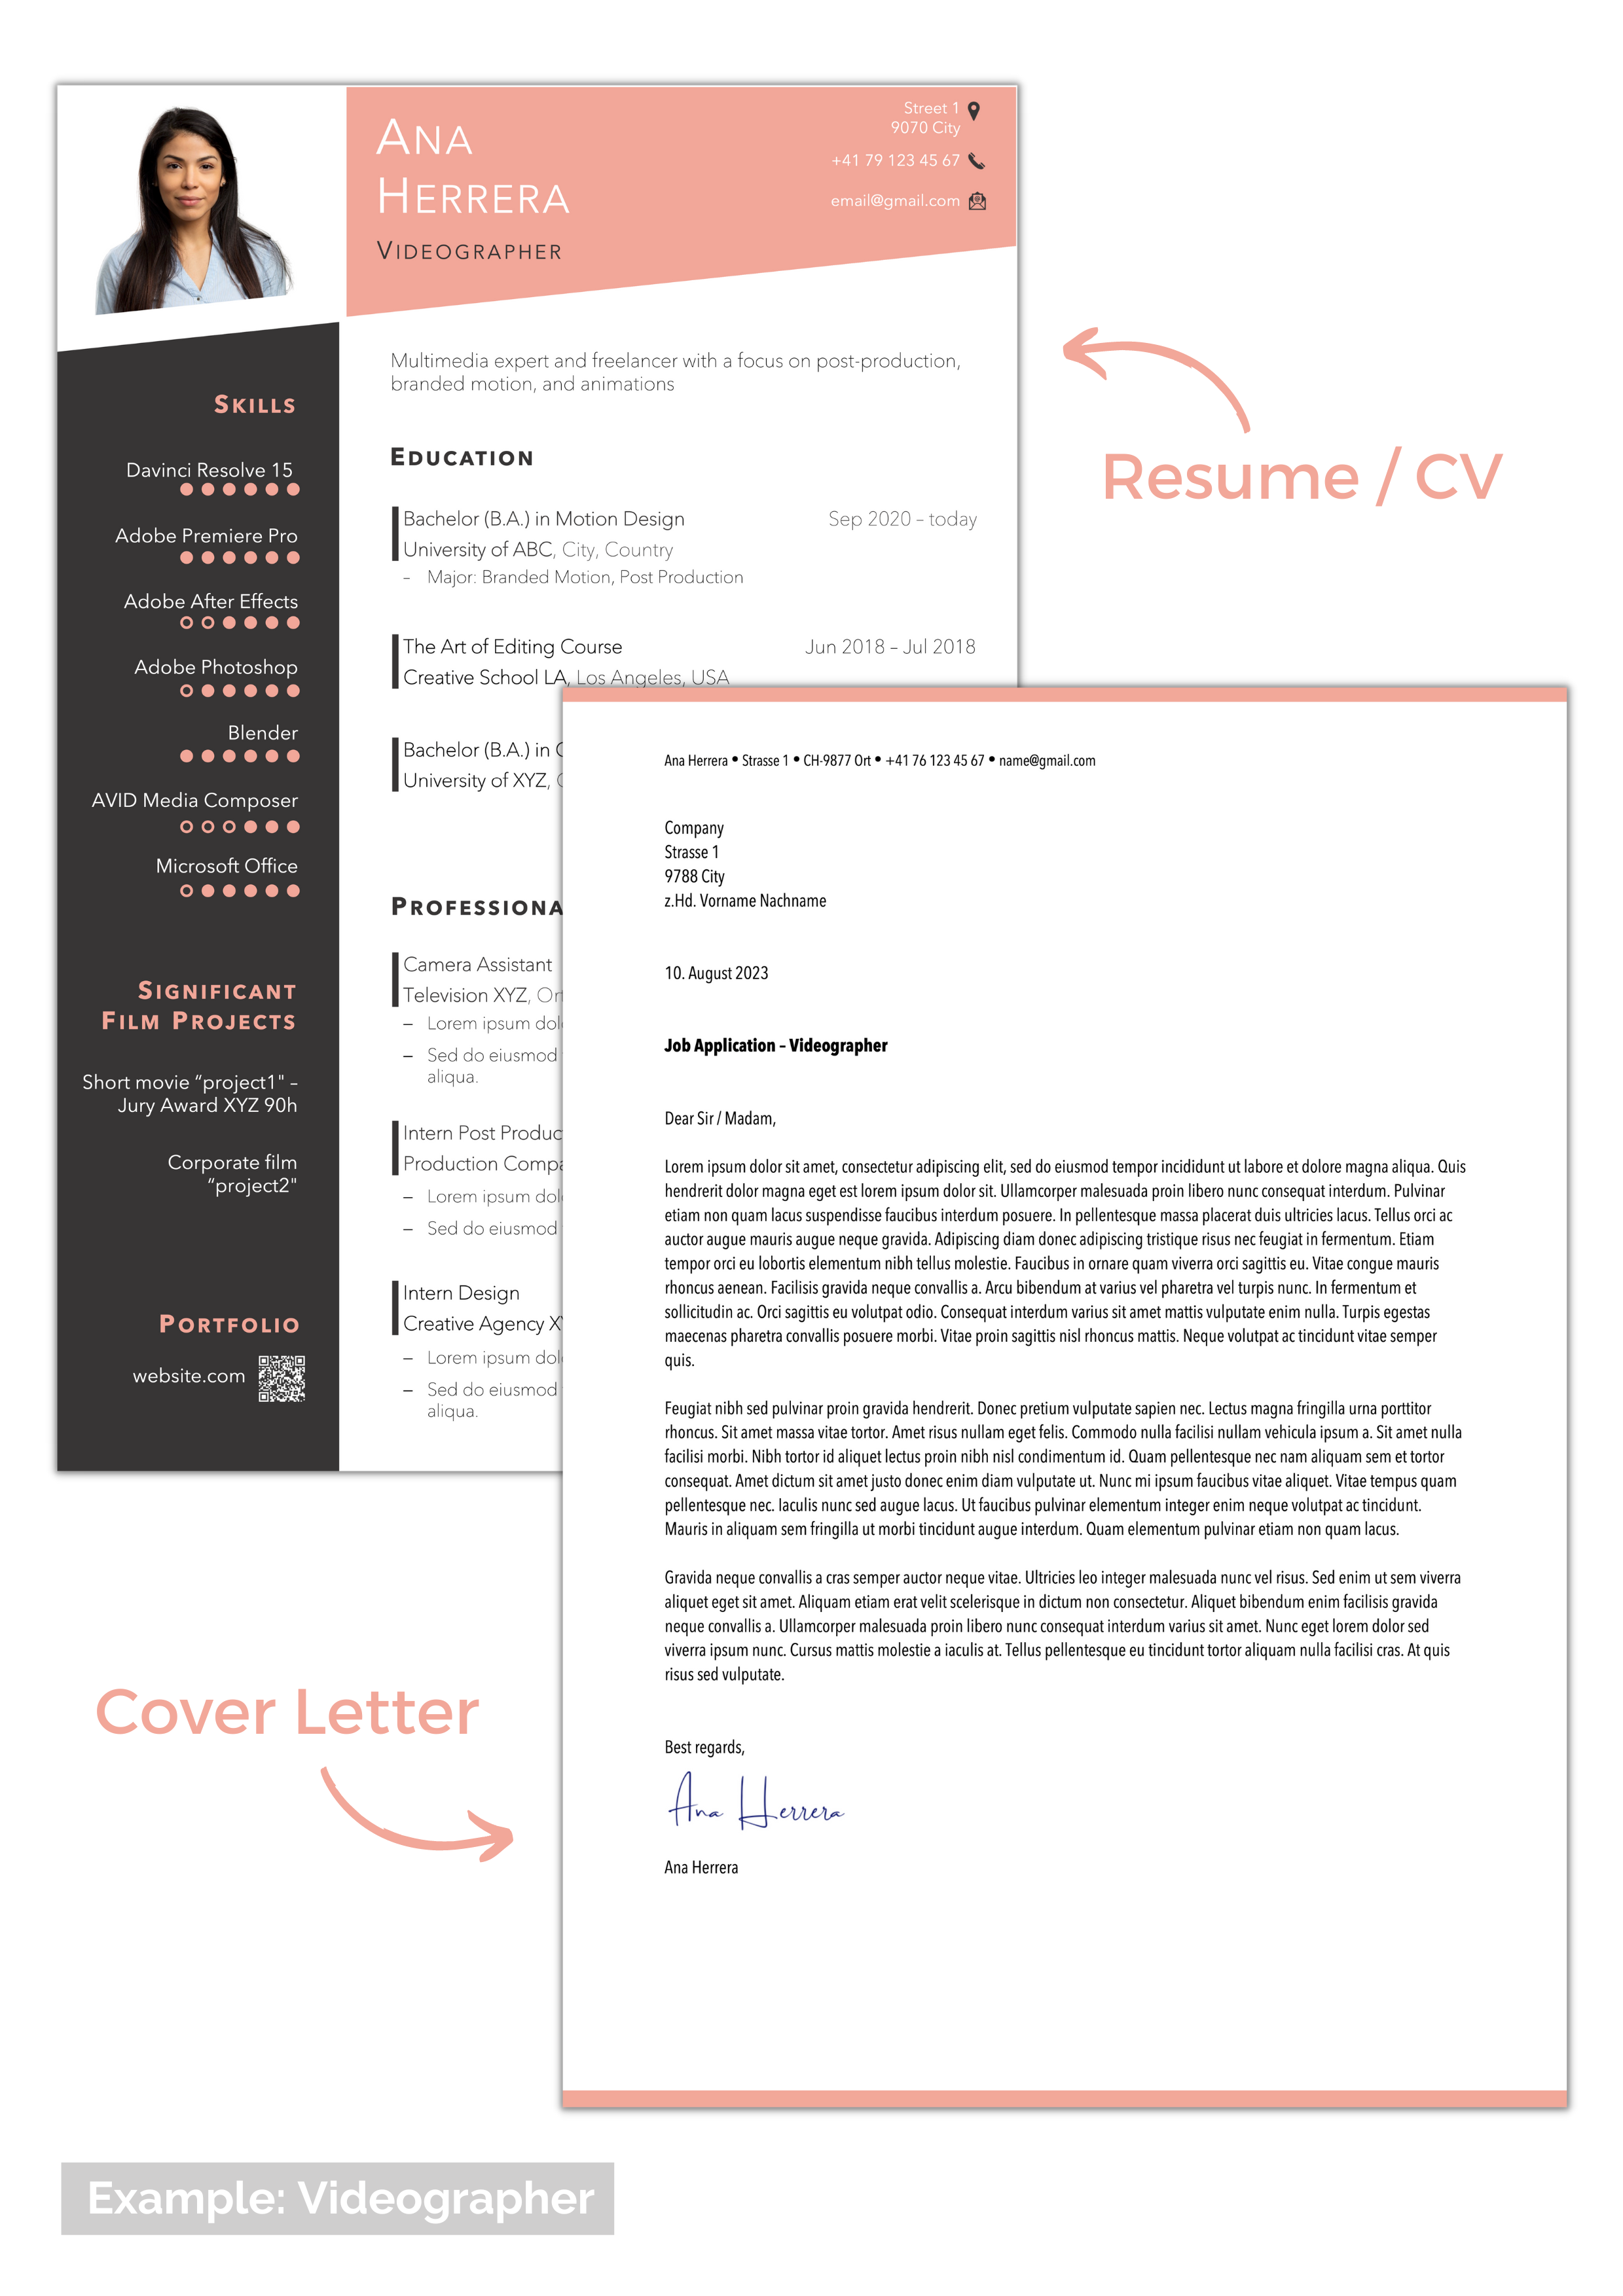 sample swiss job application resume and cover letter for videographer